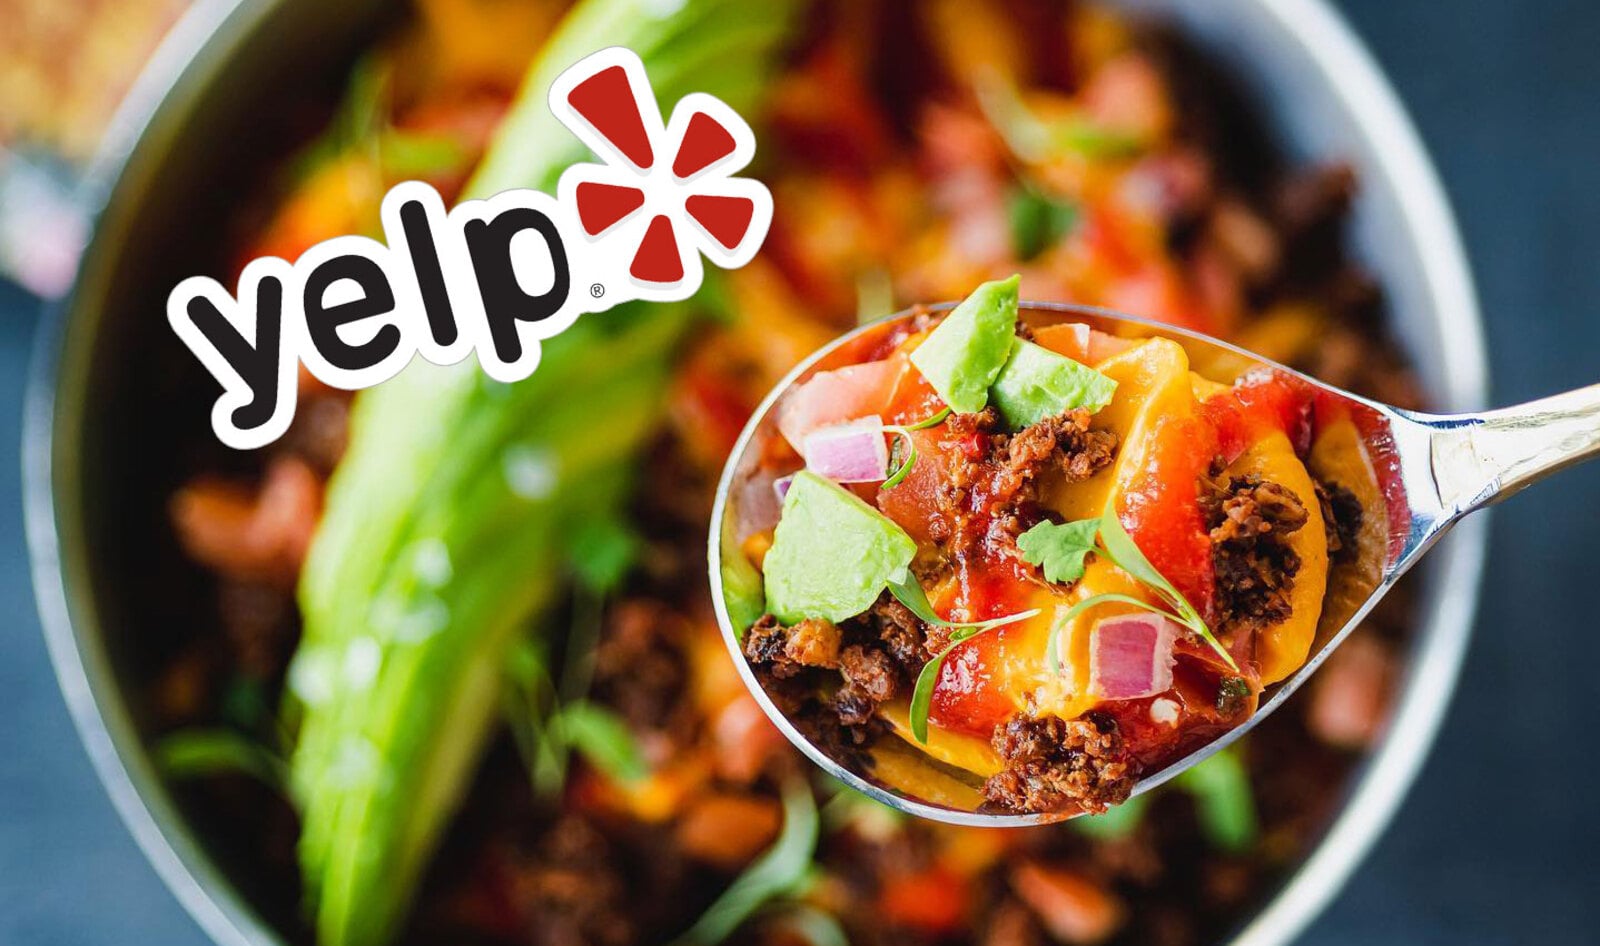 Yelp Reveals Its Top Vegan Restaurant Options in Every State